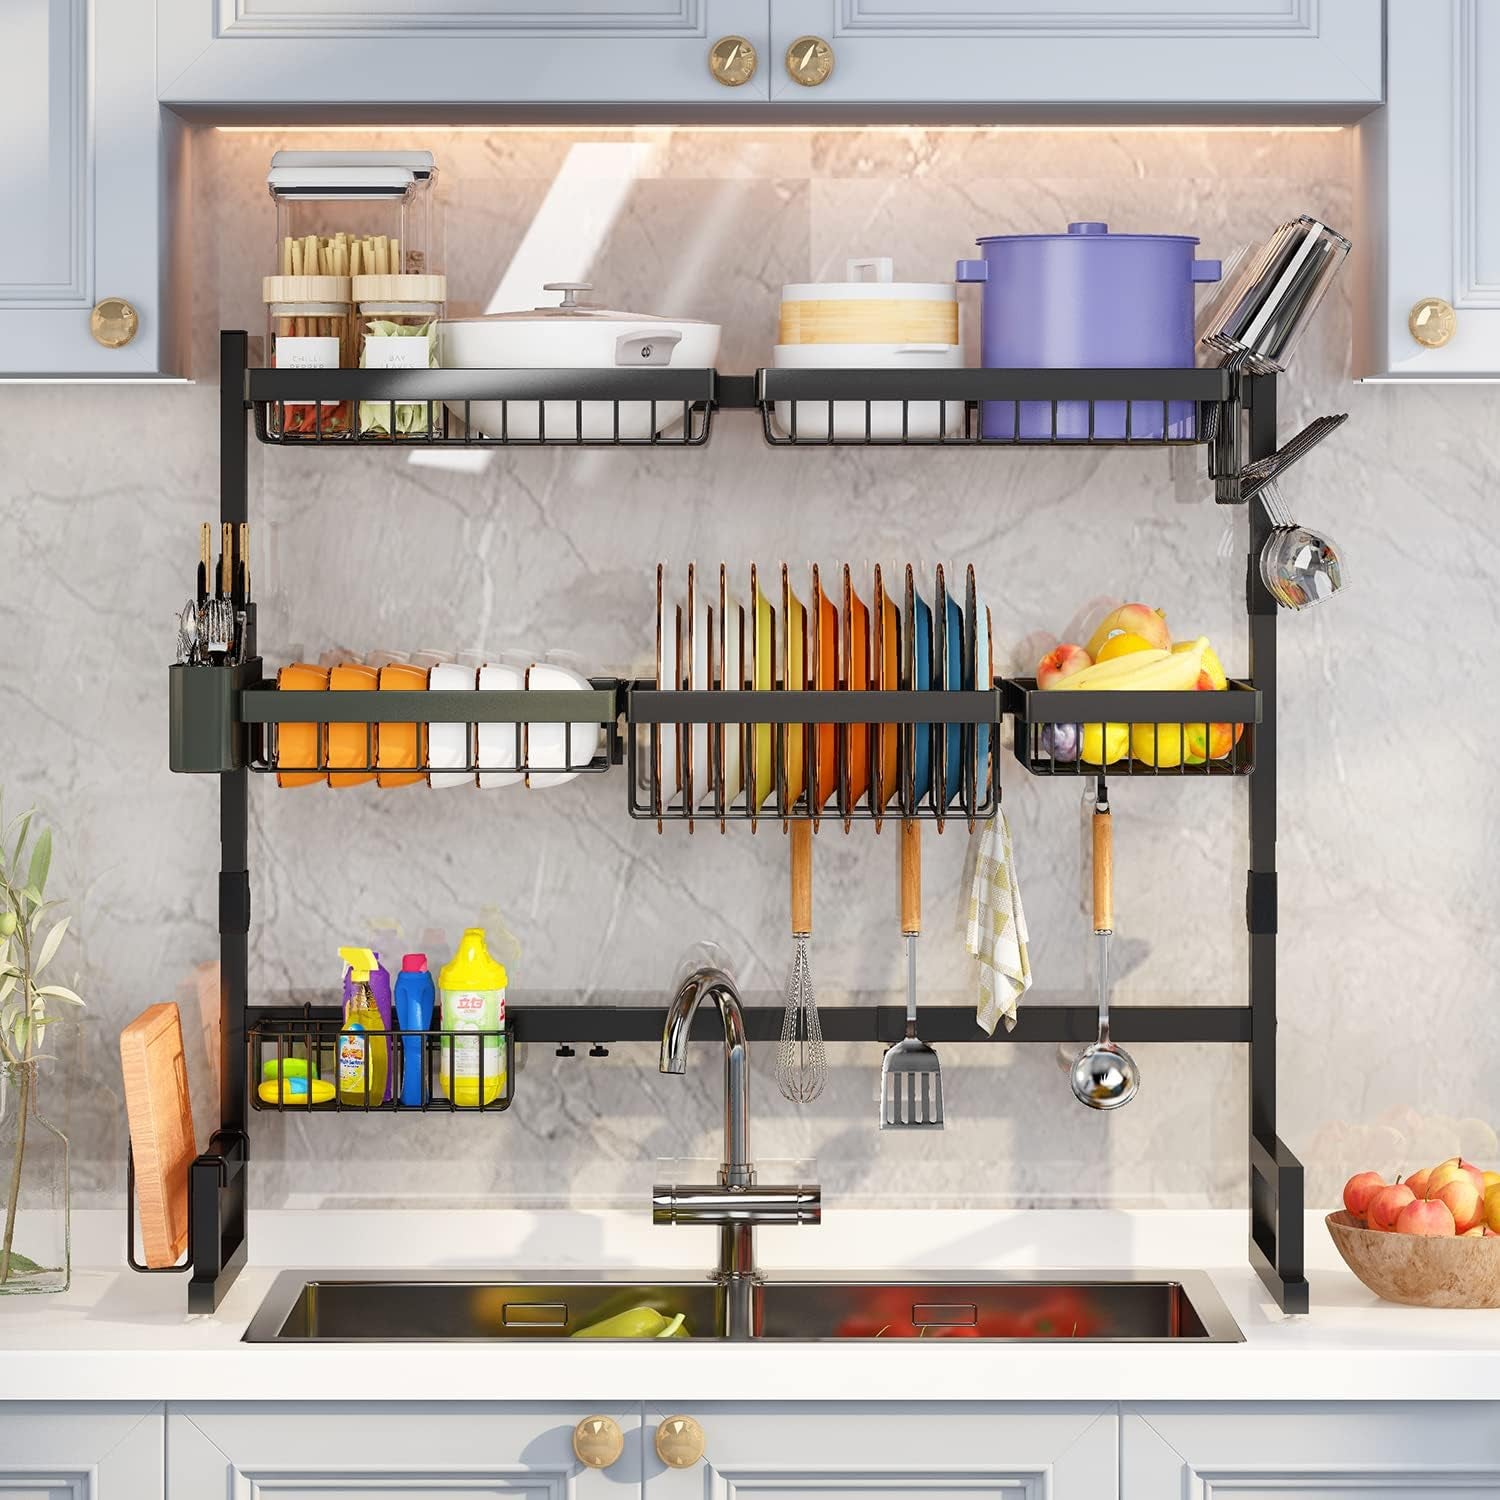 over-the-sink rack holding clean dishes, cleaning supplies, and produce